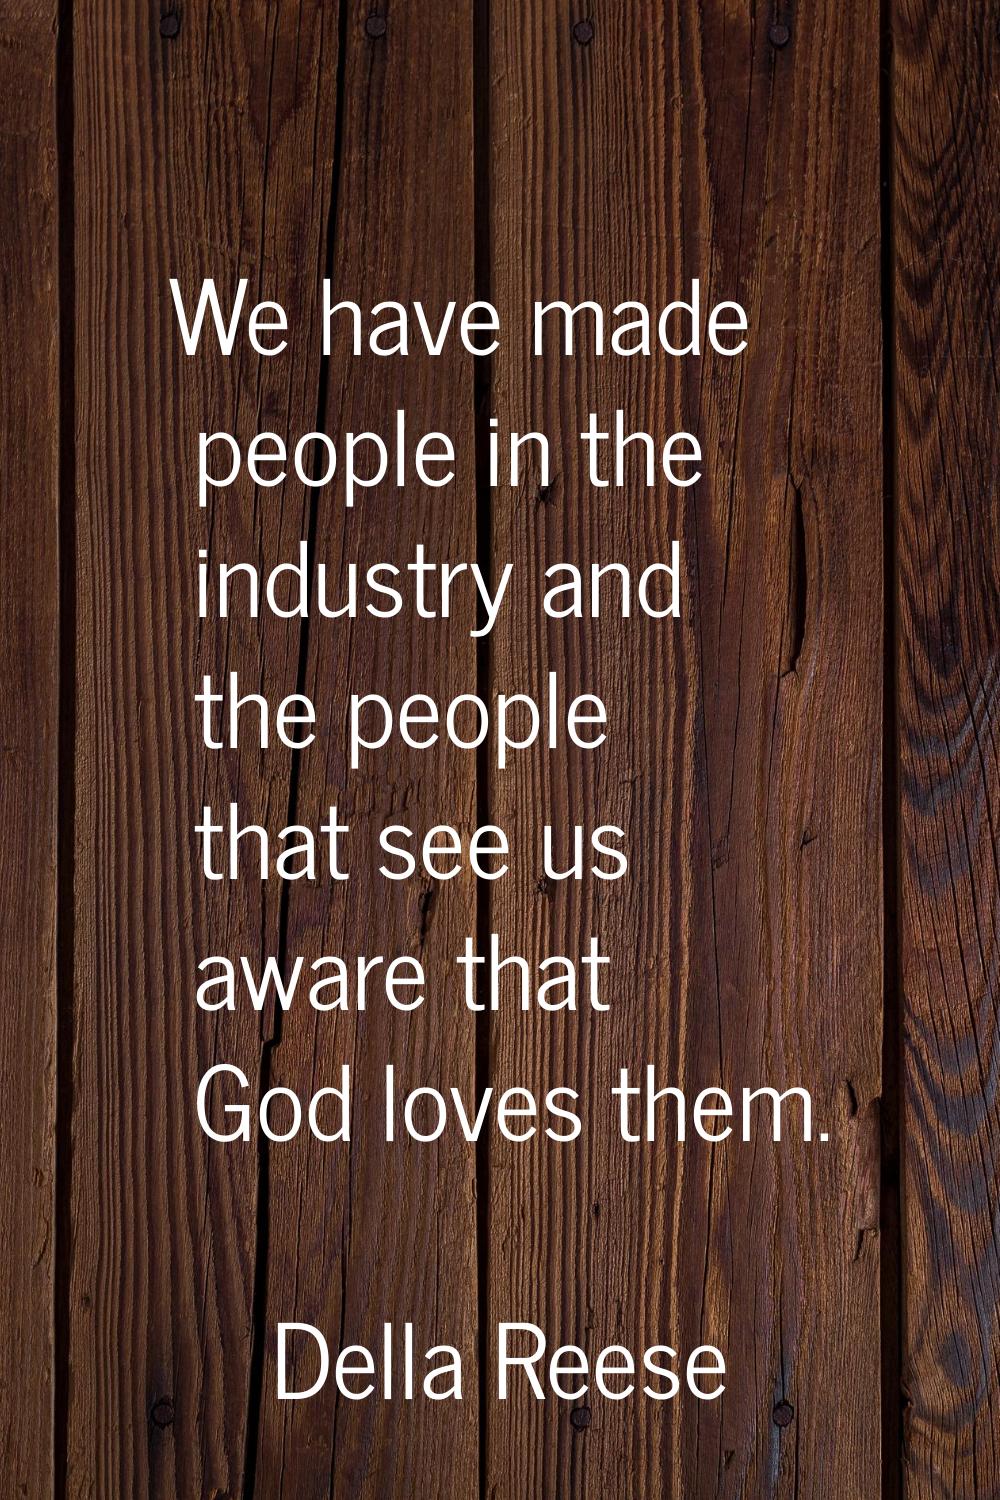 We have made people in the industry and the people that see us aware that God loves them.